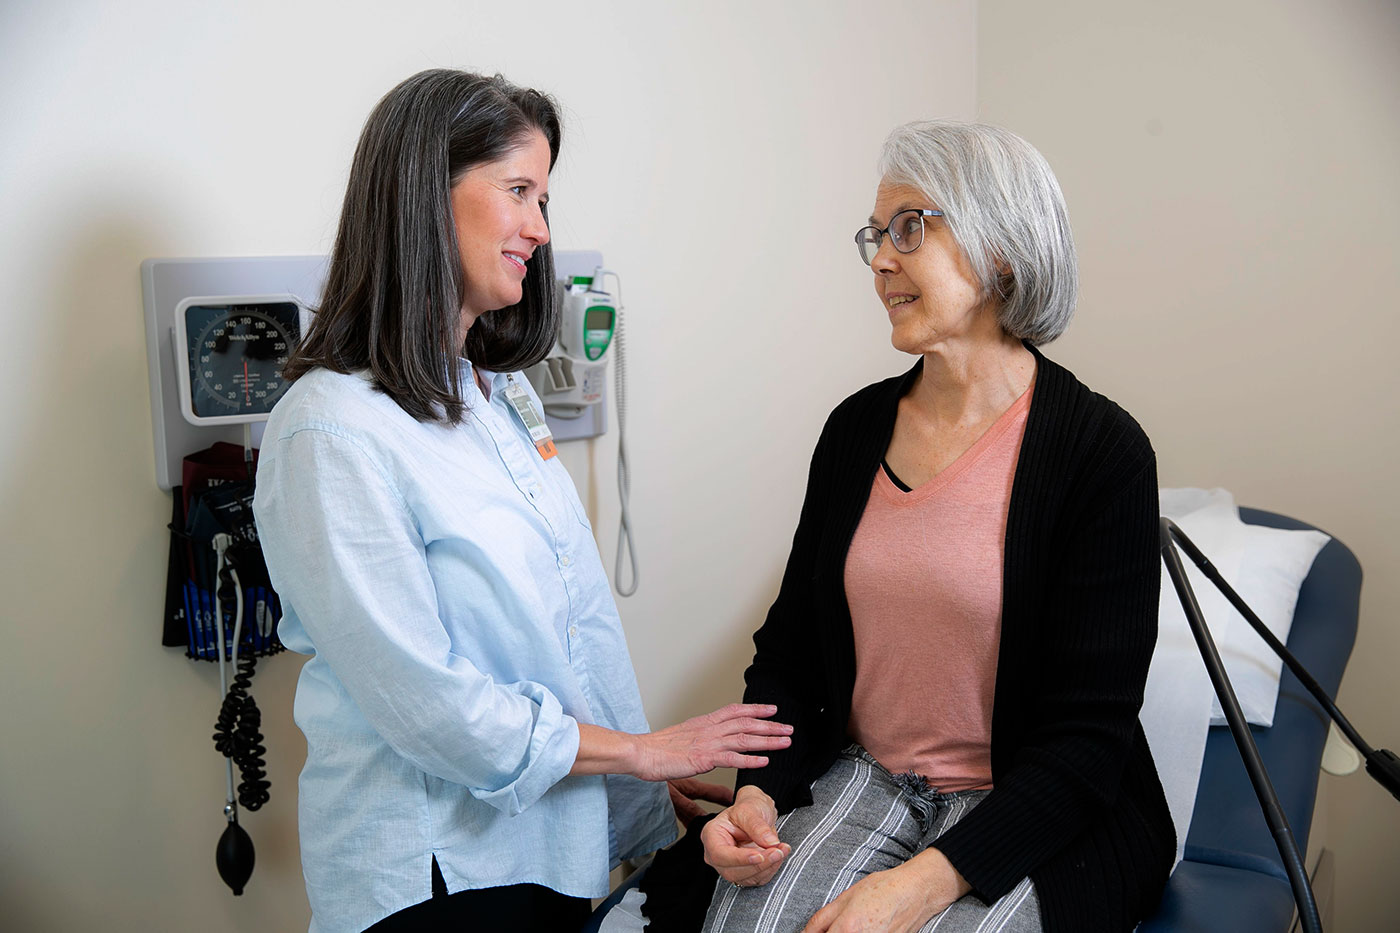 A provider and her patient conversing in an examination room.